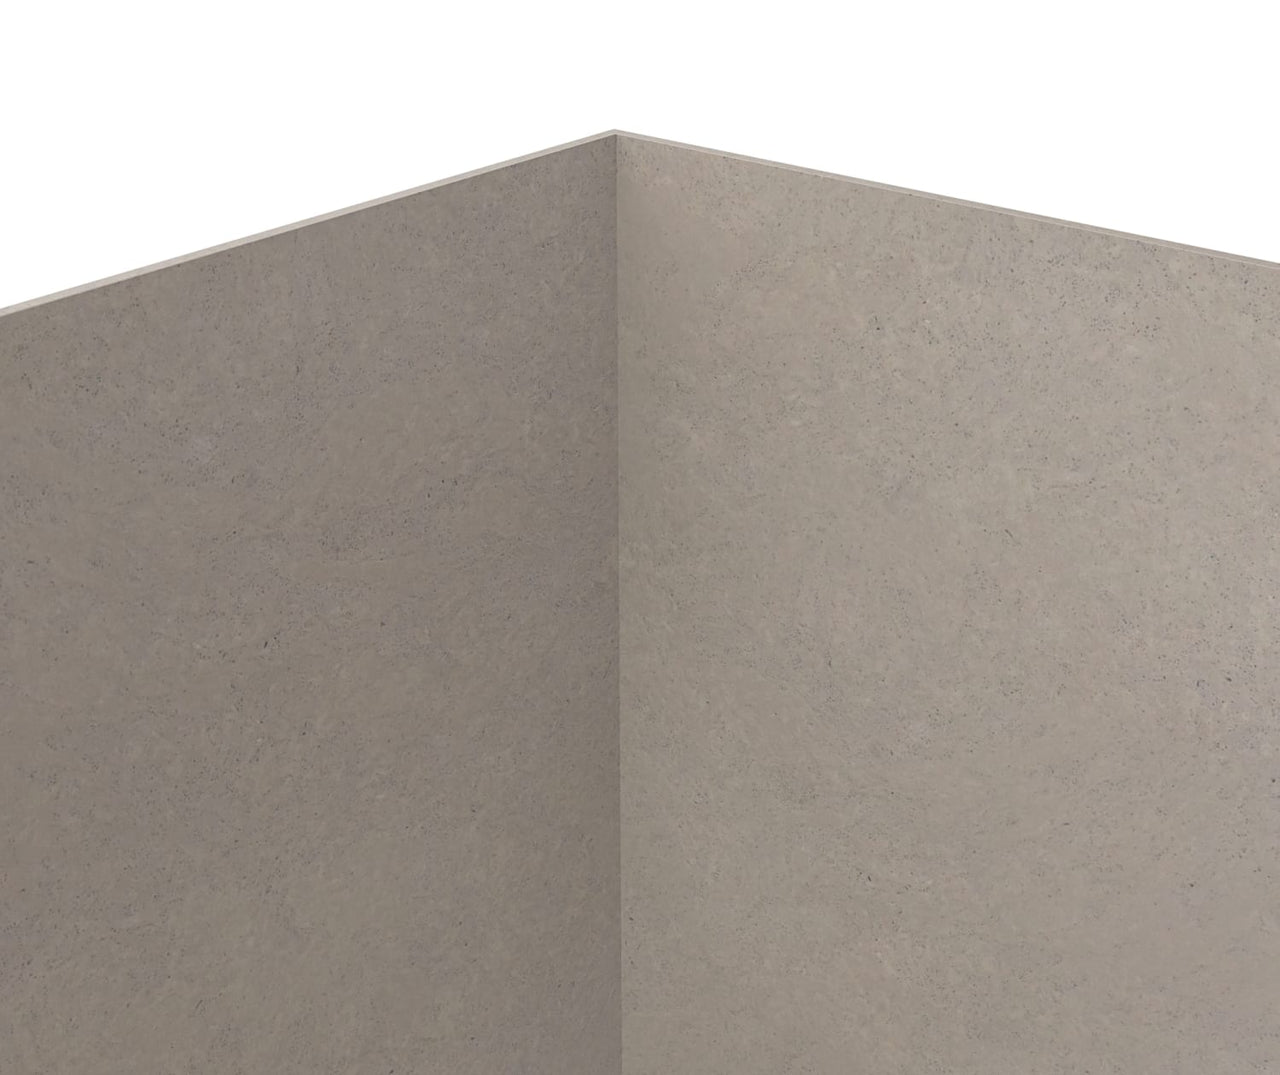 36x48x96 Swanstone Solid Surface Shower Wall Kit - BNGBath